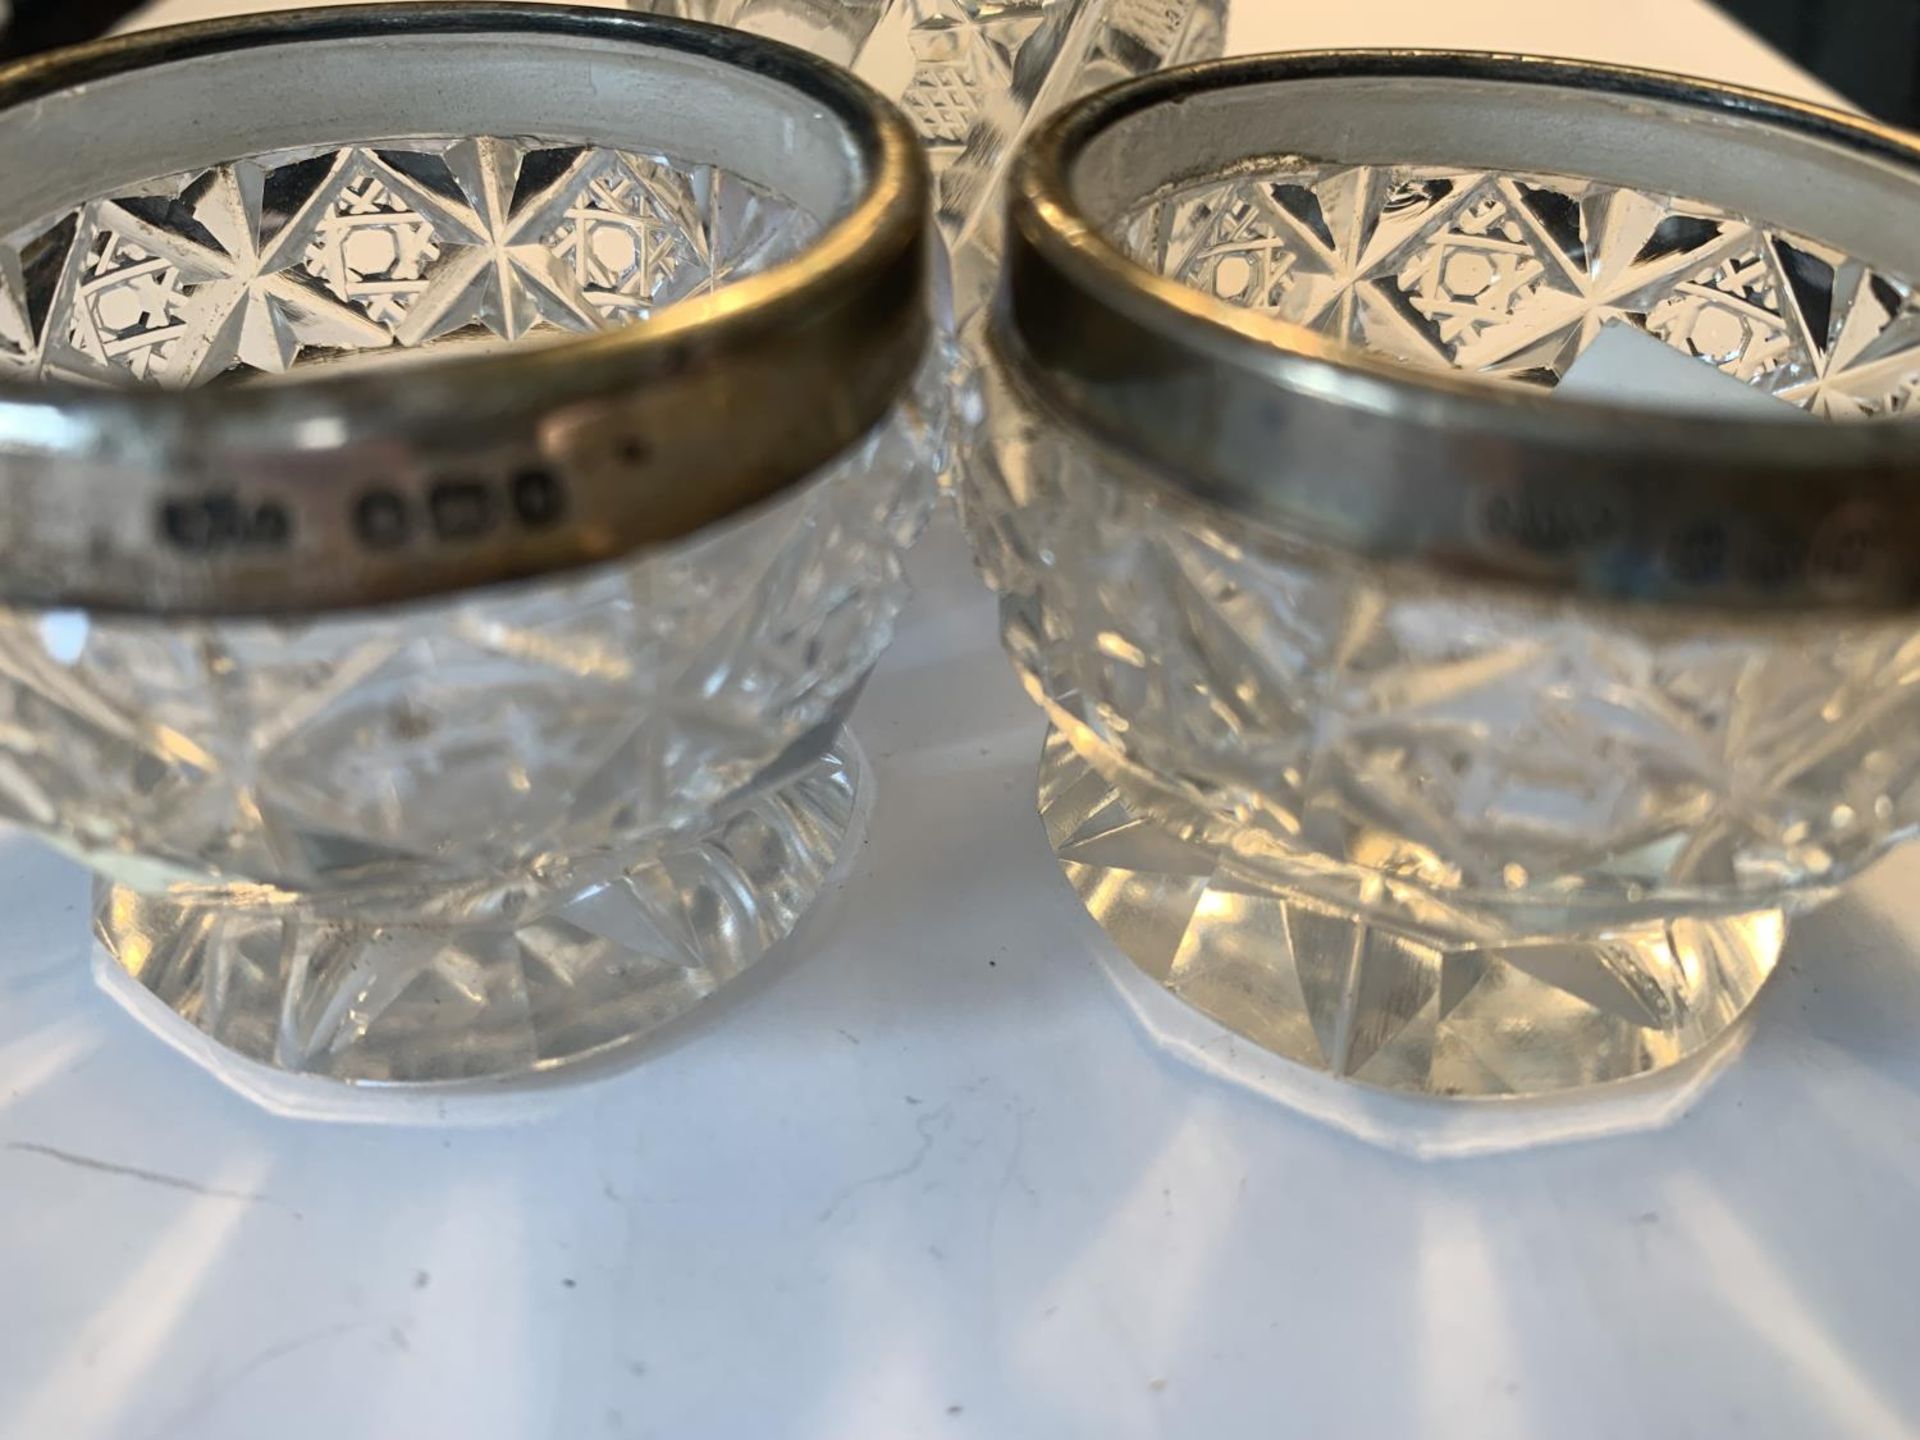 THREE CUT GLASS POTS TO INCLUDE TWO HALLMARKED BIRMINGHAM 1907/08 SILVER RIMMED AND A PERFUME BOTTLE - Image 2 of 4